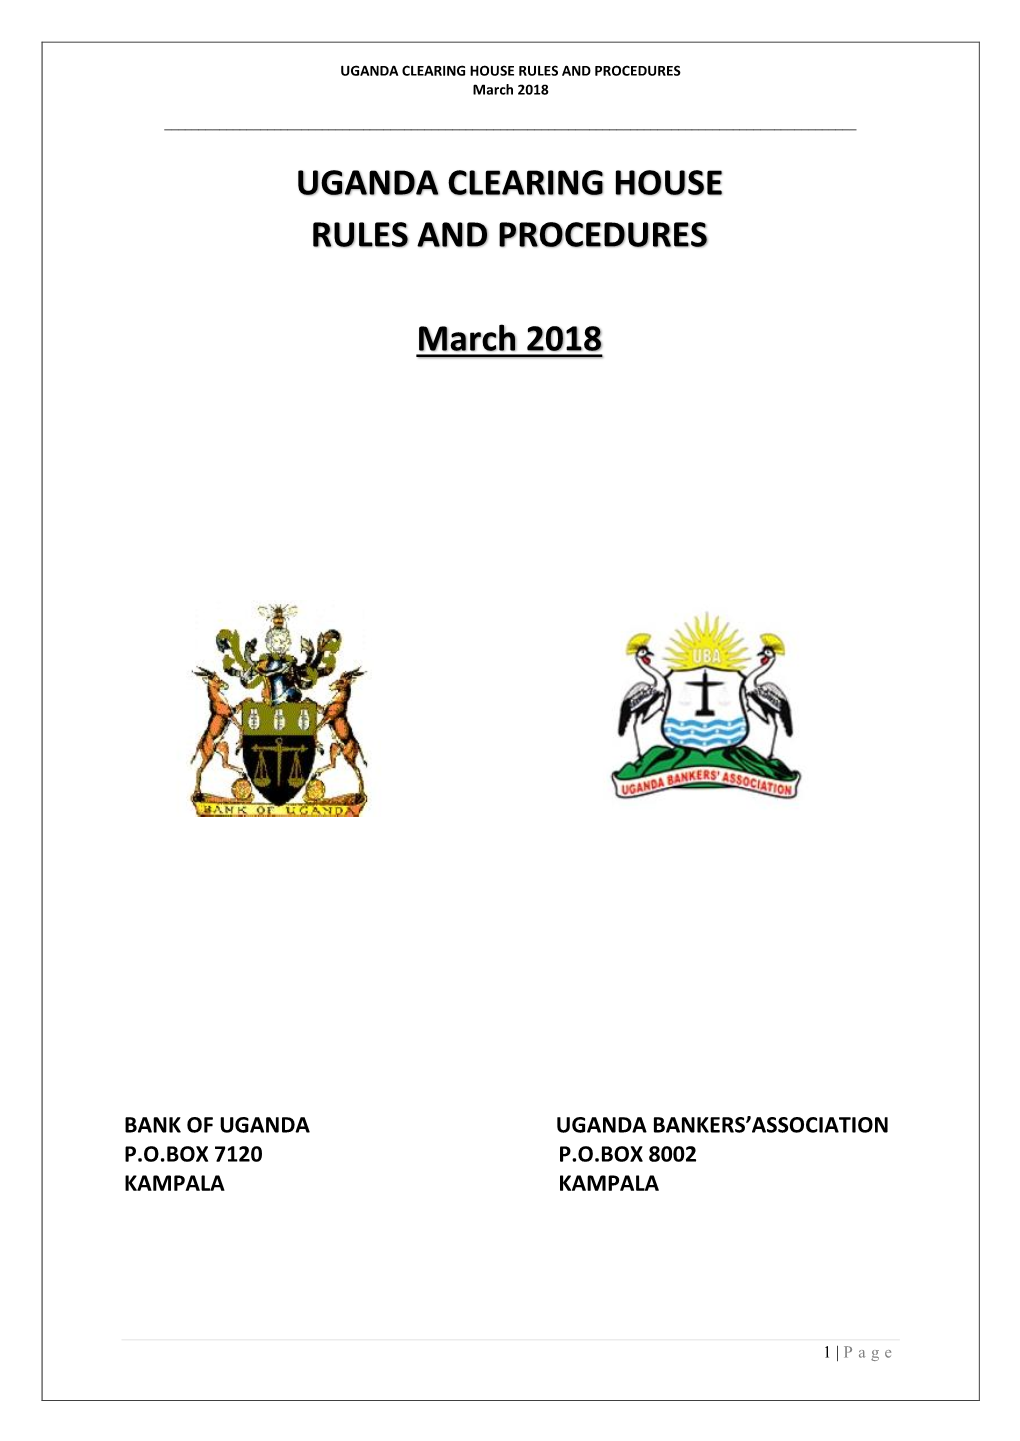 UGANDA CLEARING HOUSE RULES and PROCEDURES March 2018